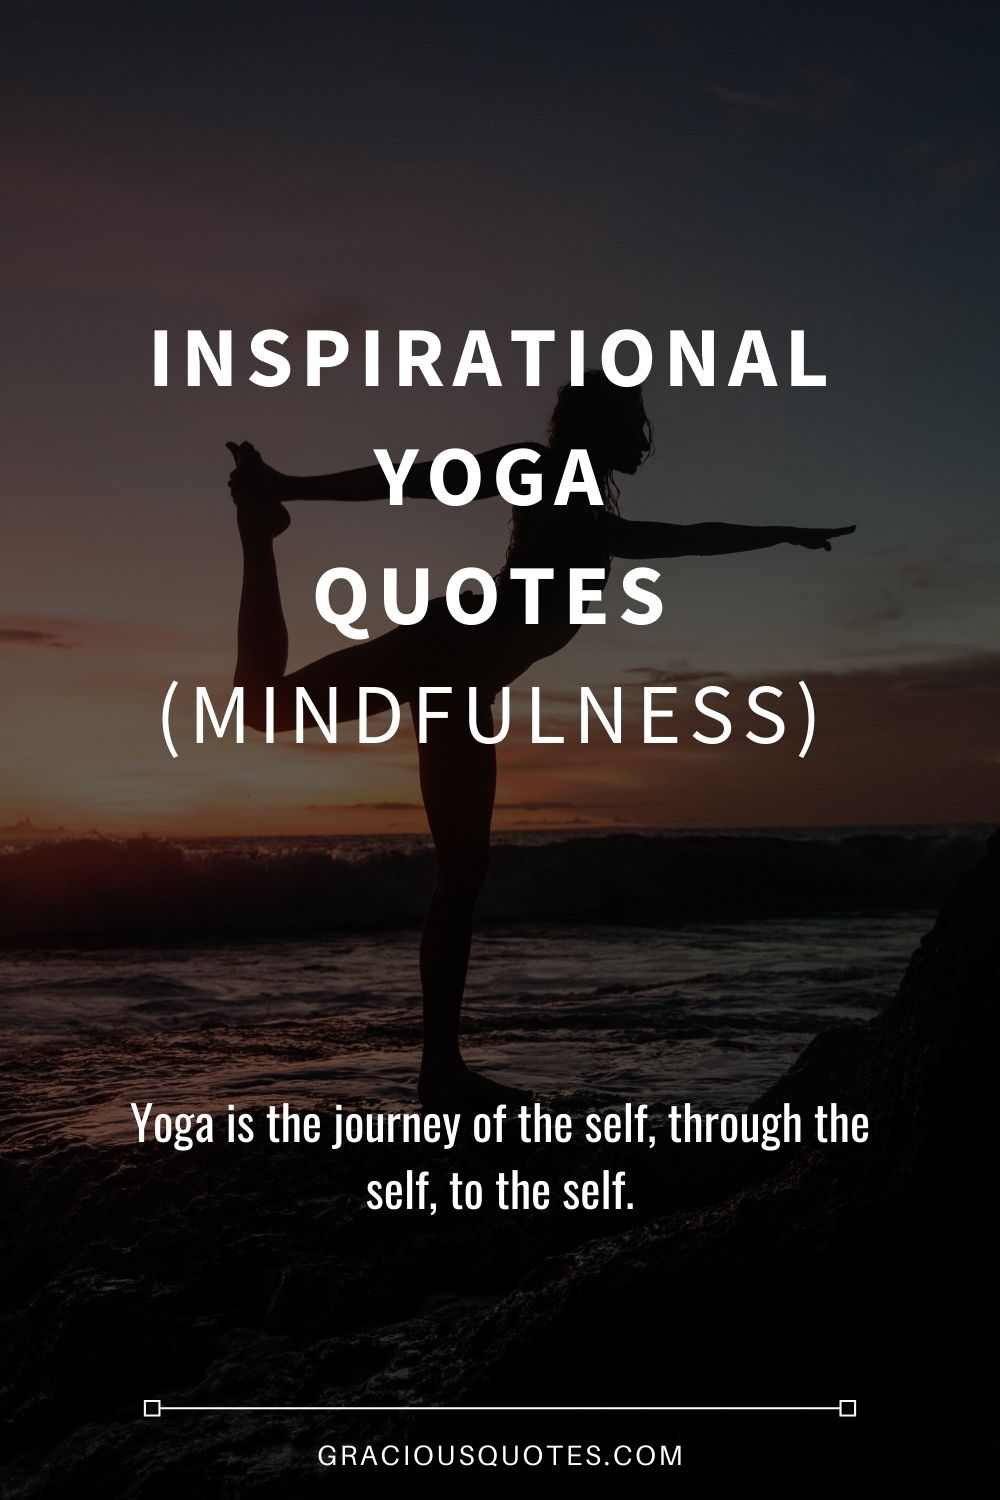 Discover 10 Best Yin Yoga Quotes and Yin Yoga Inspirational Quotes